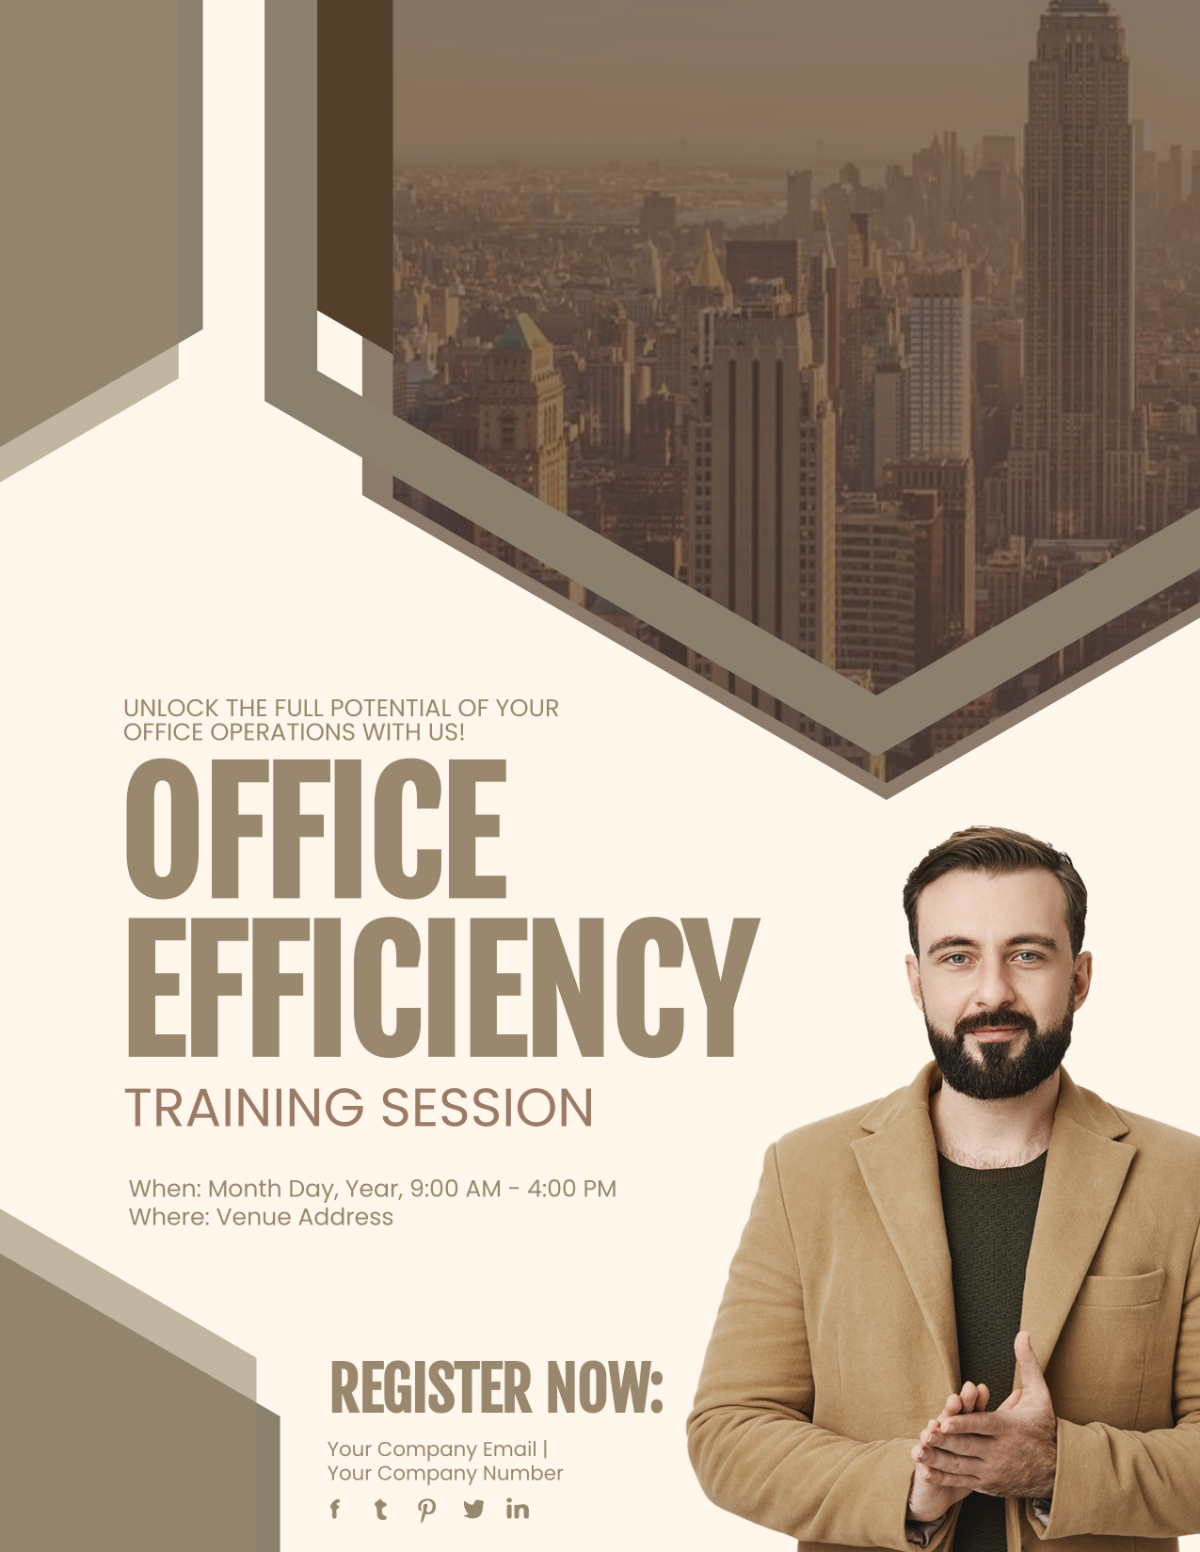 Office Efficiency Training Session Flyer Template